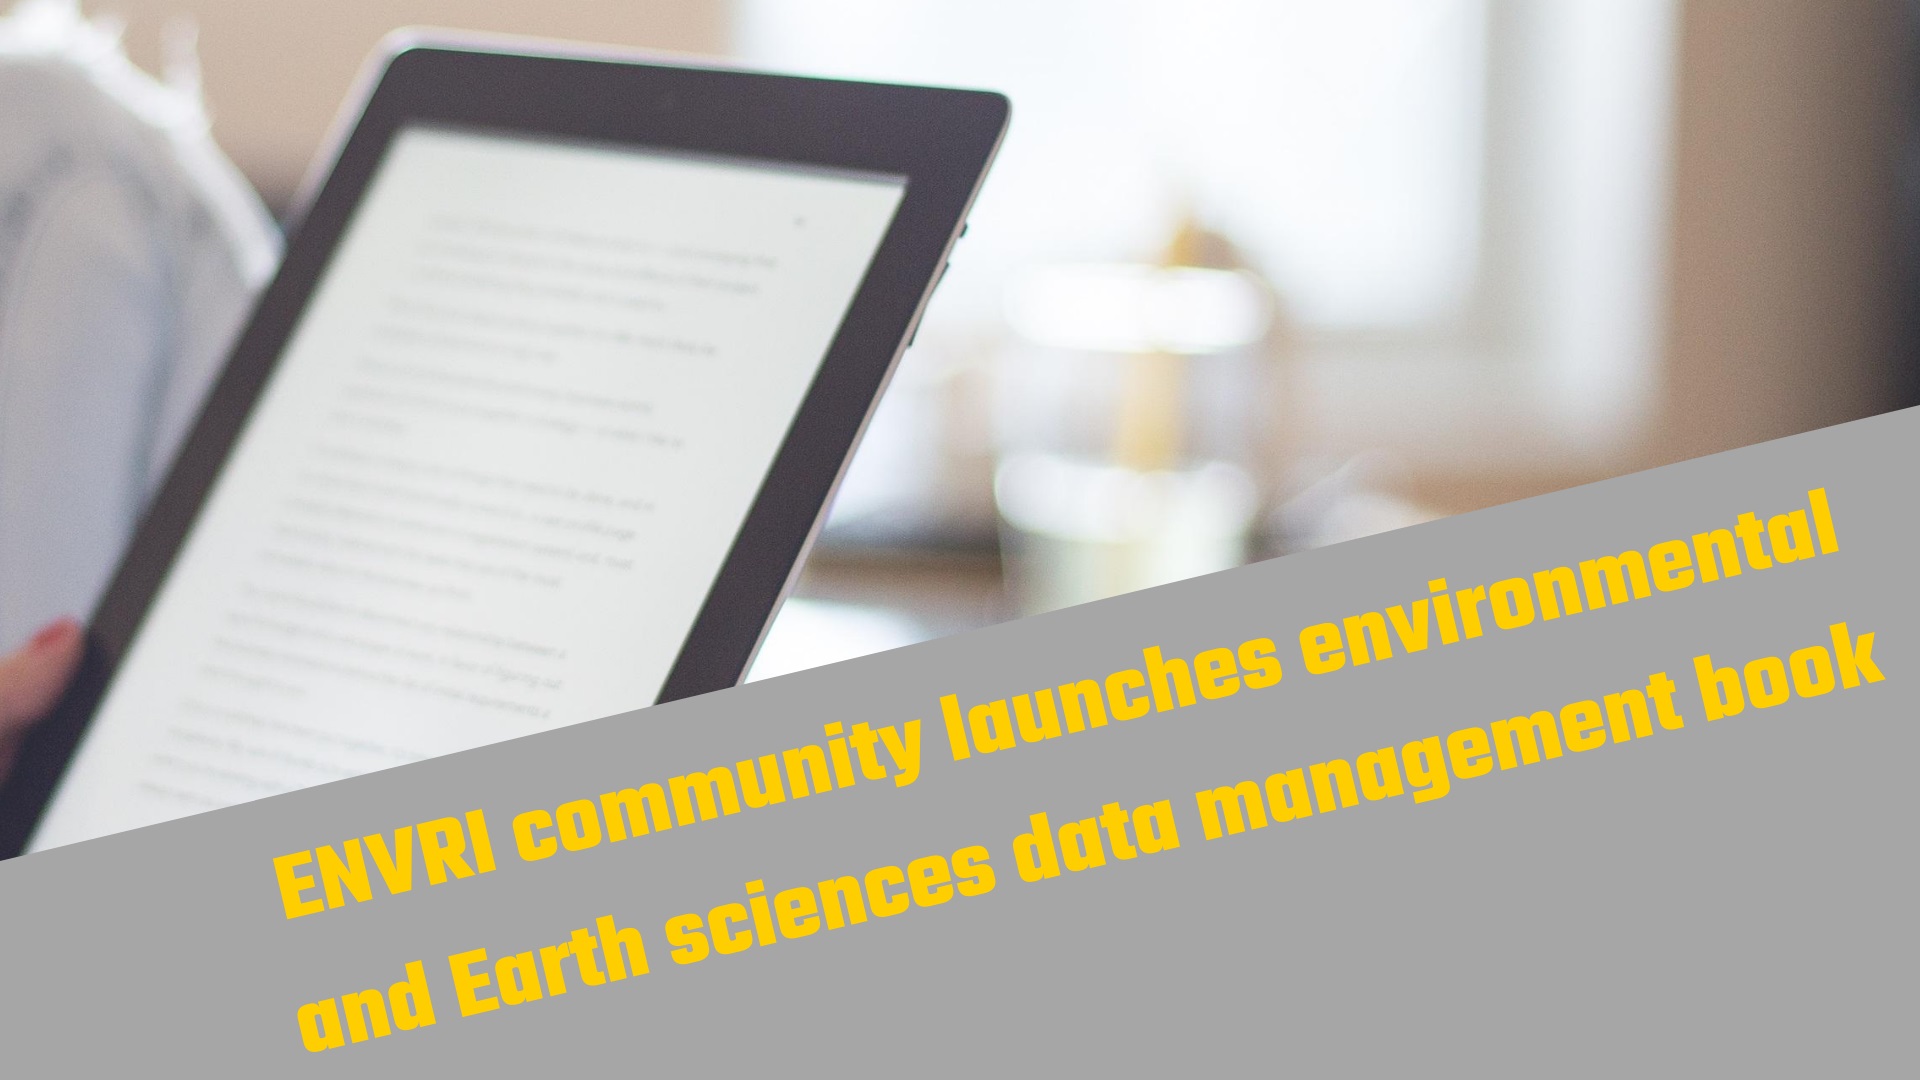 ENVRI community launches environmental and Earth sciences data management book